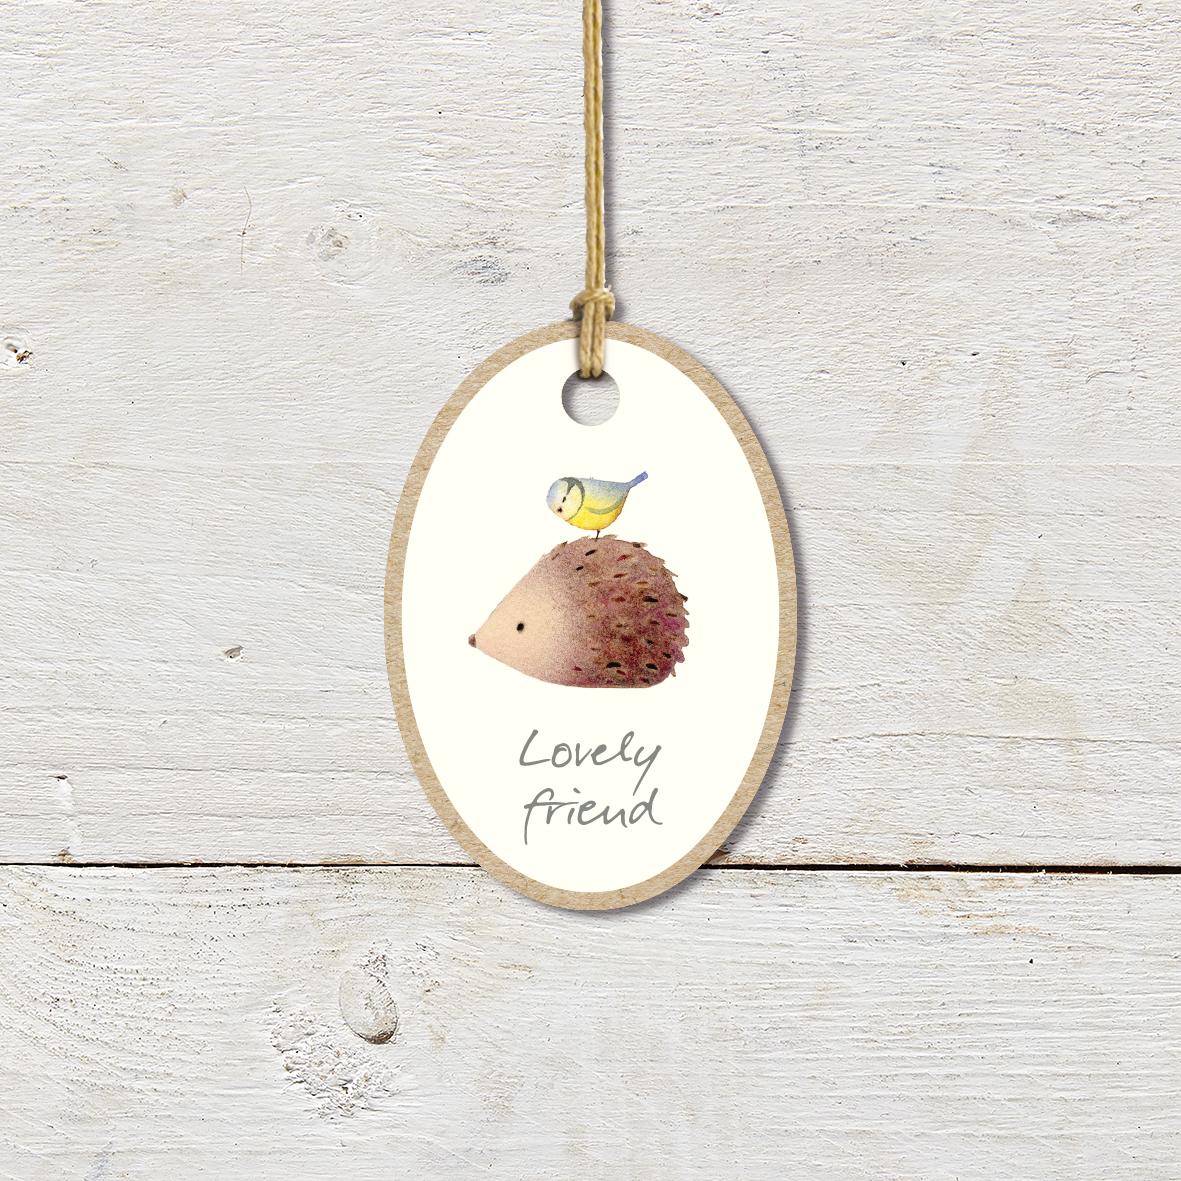 Small Wooden Keepsake Plaque/Tag featuring a cute hedgehog and blue tit with a ’Lovely Friend’ caption.